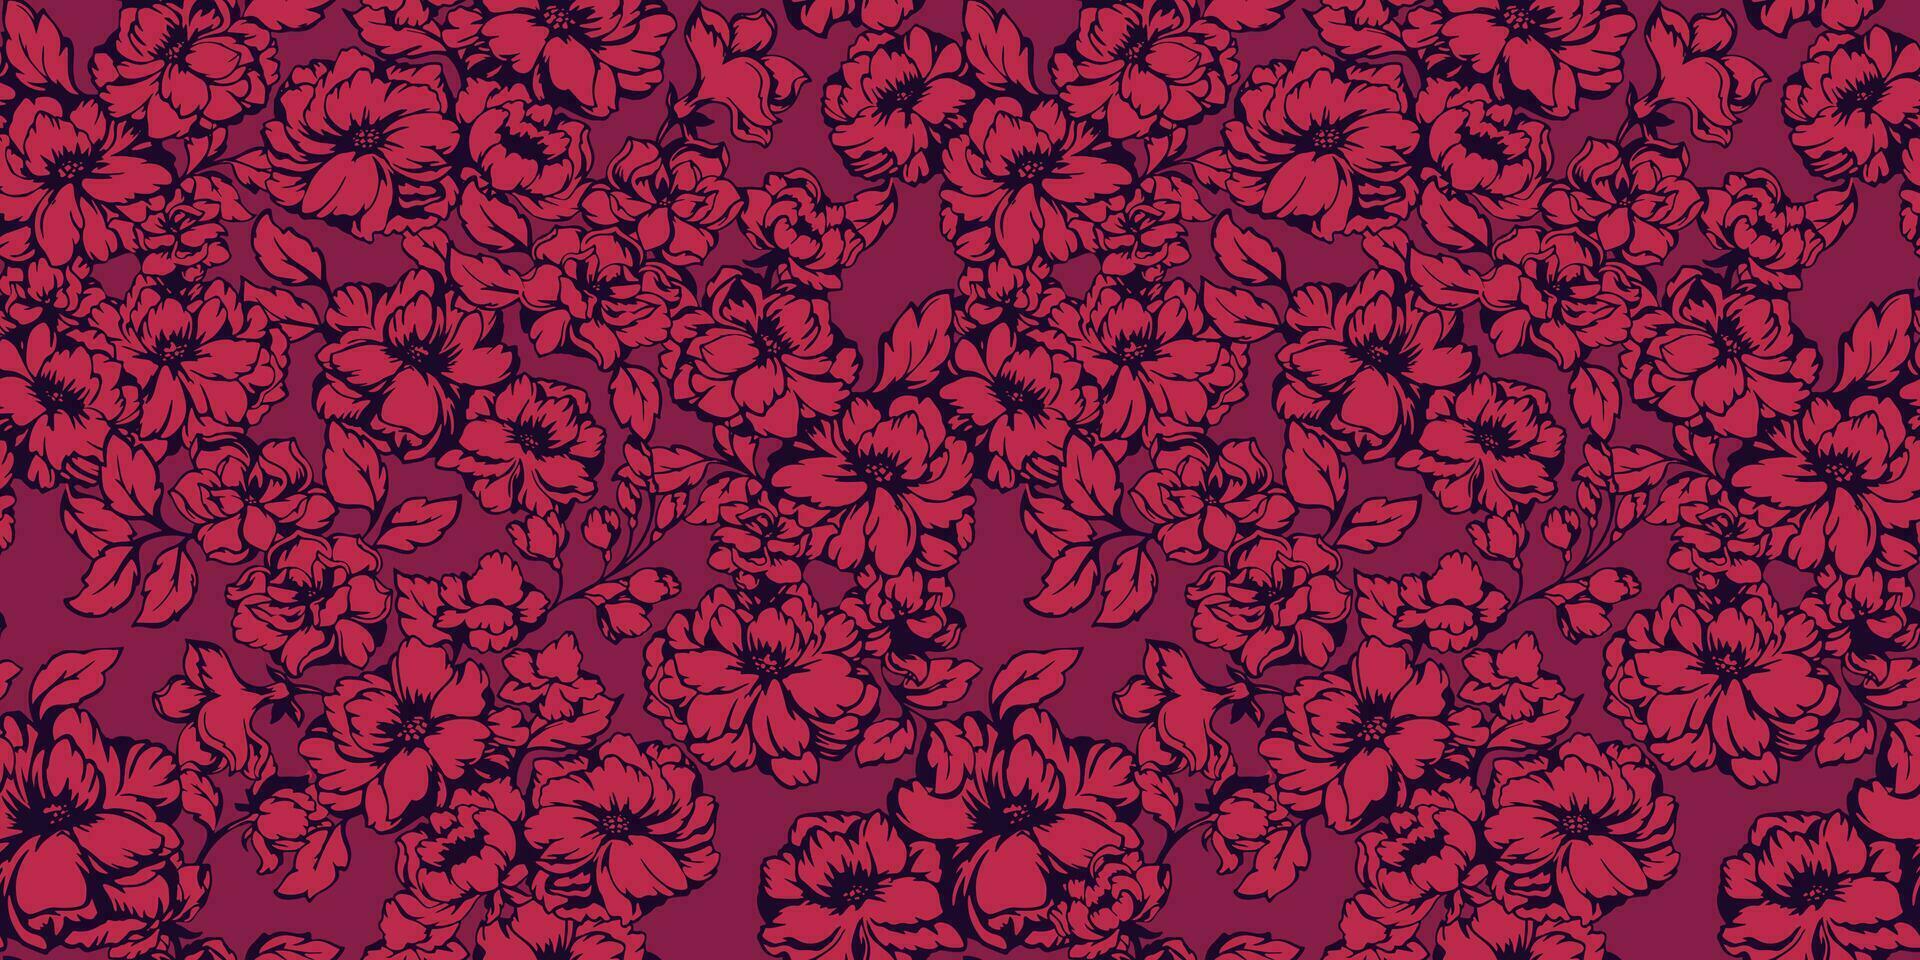 Monotone burgundy field blooming floral seamless pattern. Vector hand drawn.  Stylized creative textured flowers peonies, rose. Template for design, textile, fashion, surface design, fabric